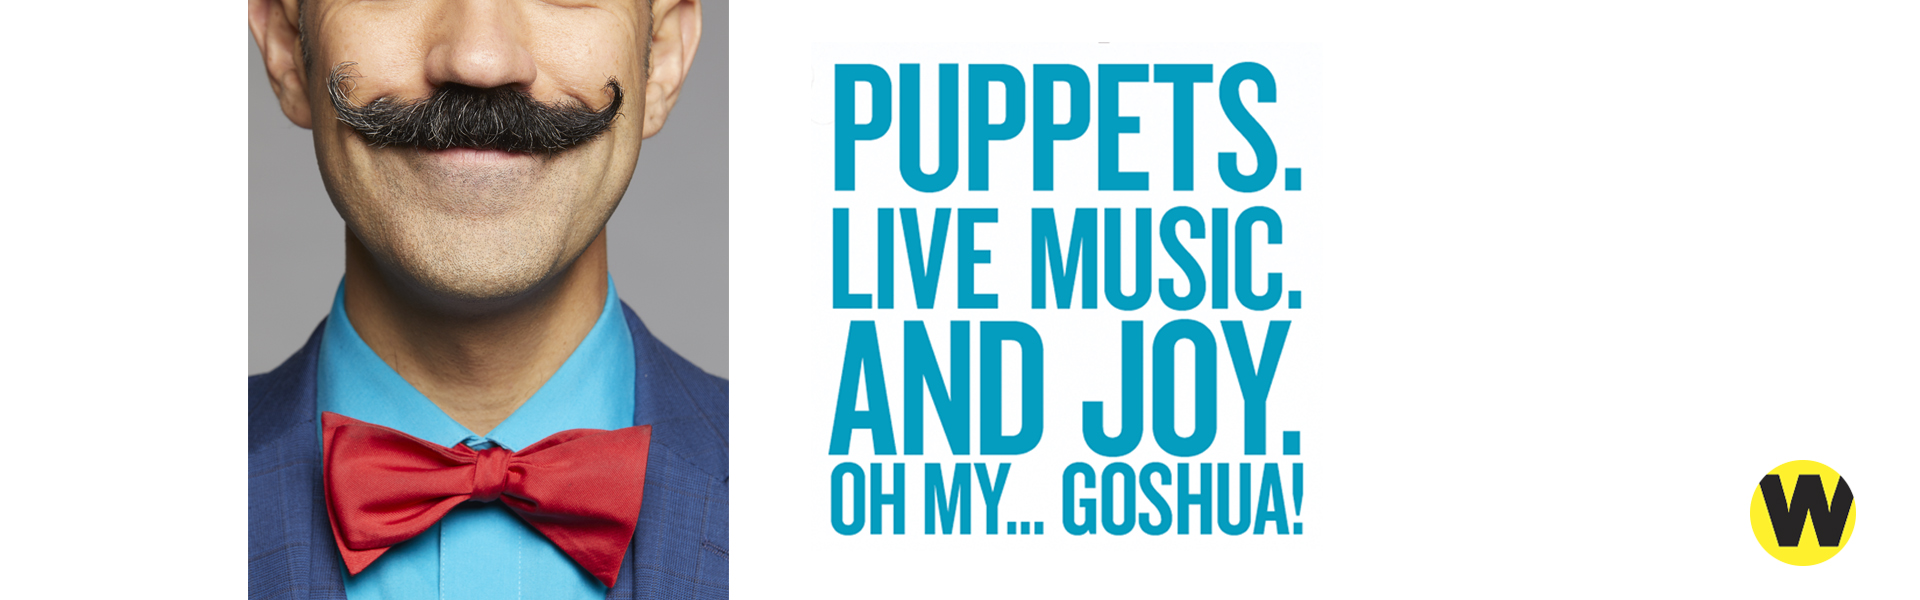 The Joshua Show. Puppets. Live Music. And Joy. Oh my... Goshua!